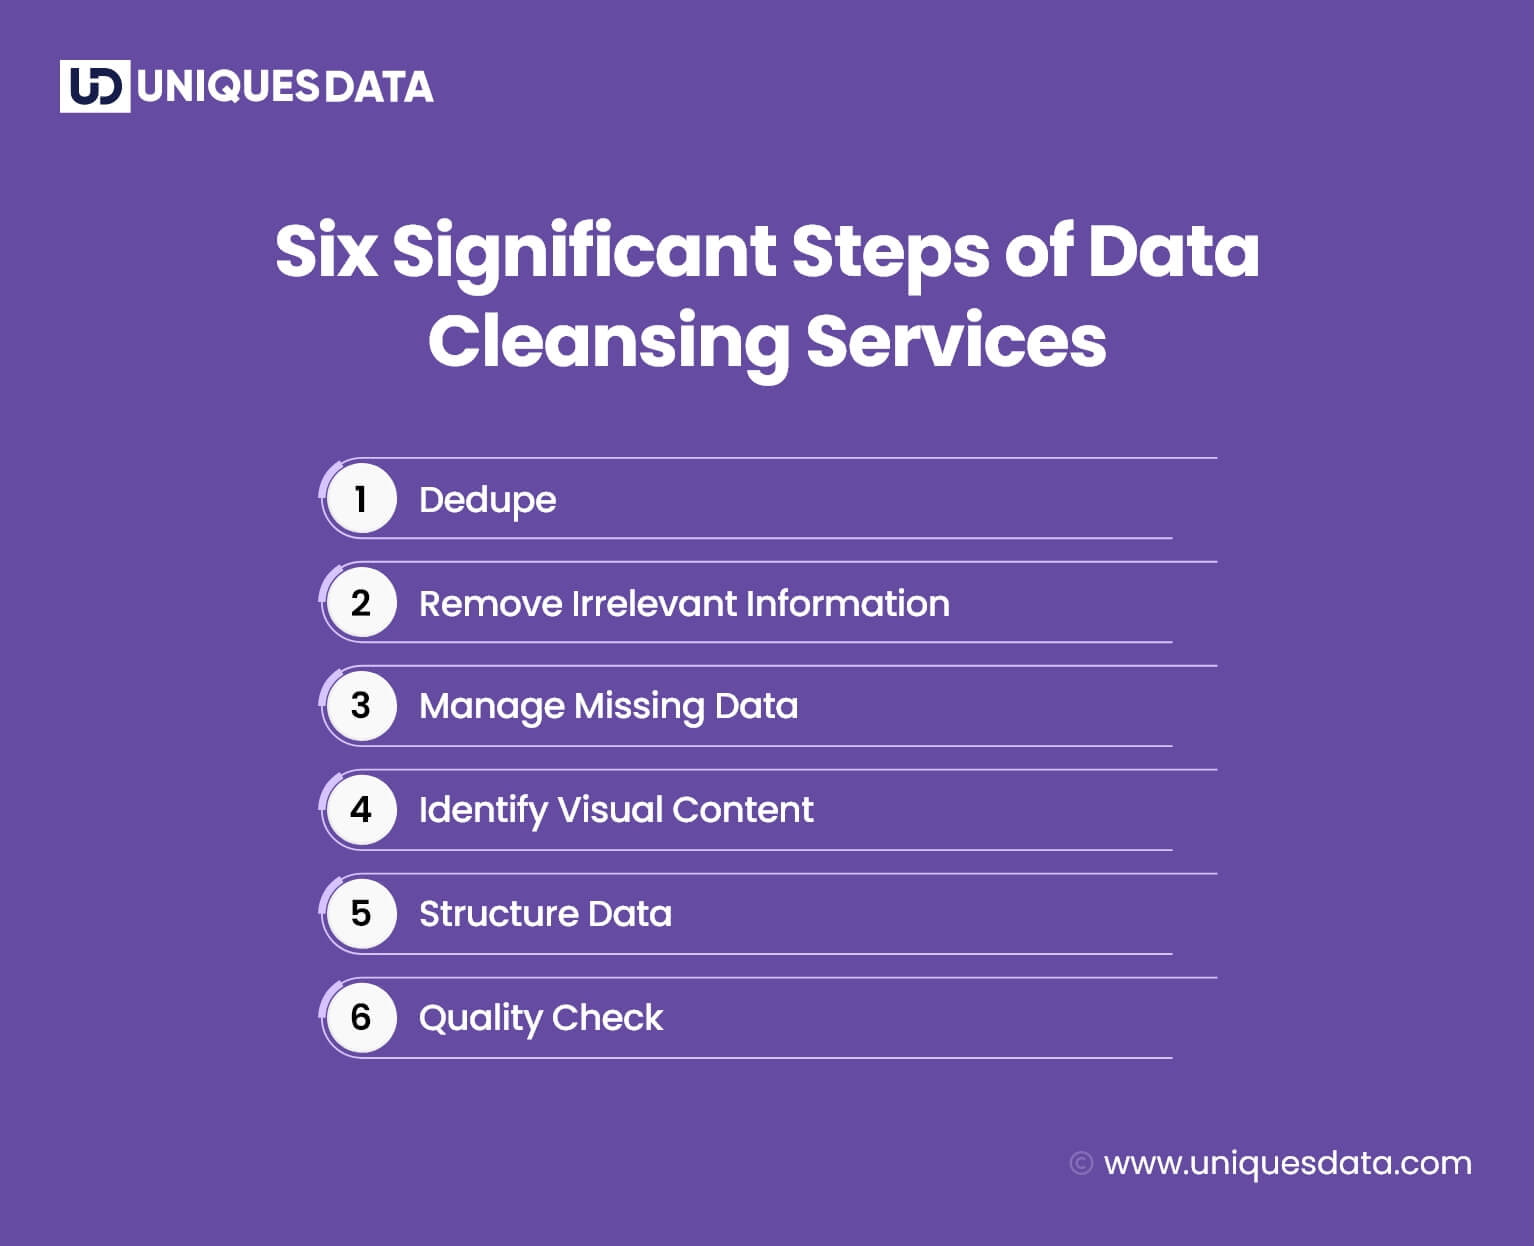 Six Significant Steps of Data Cleansing Services